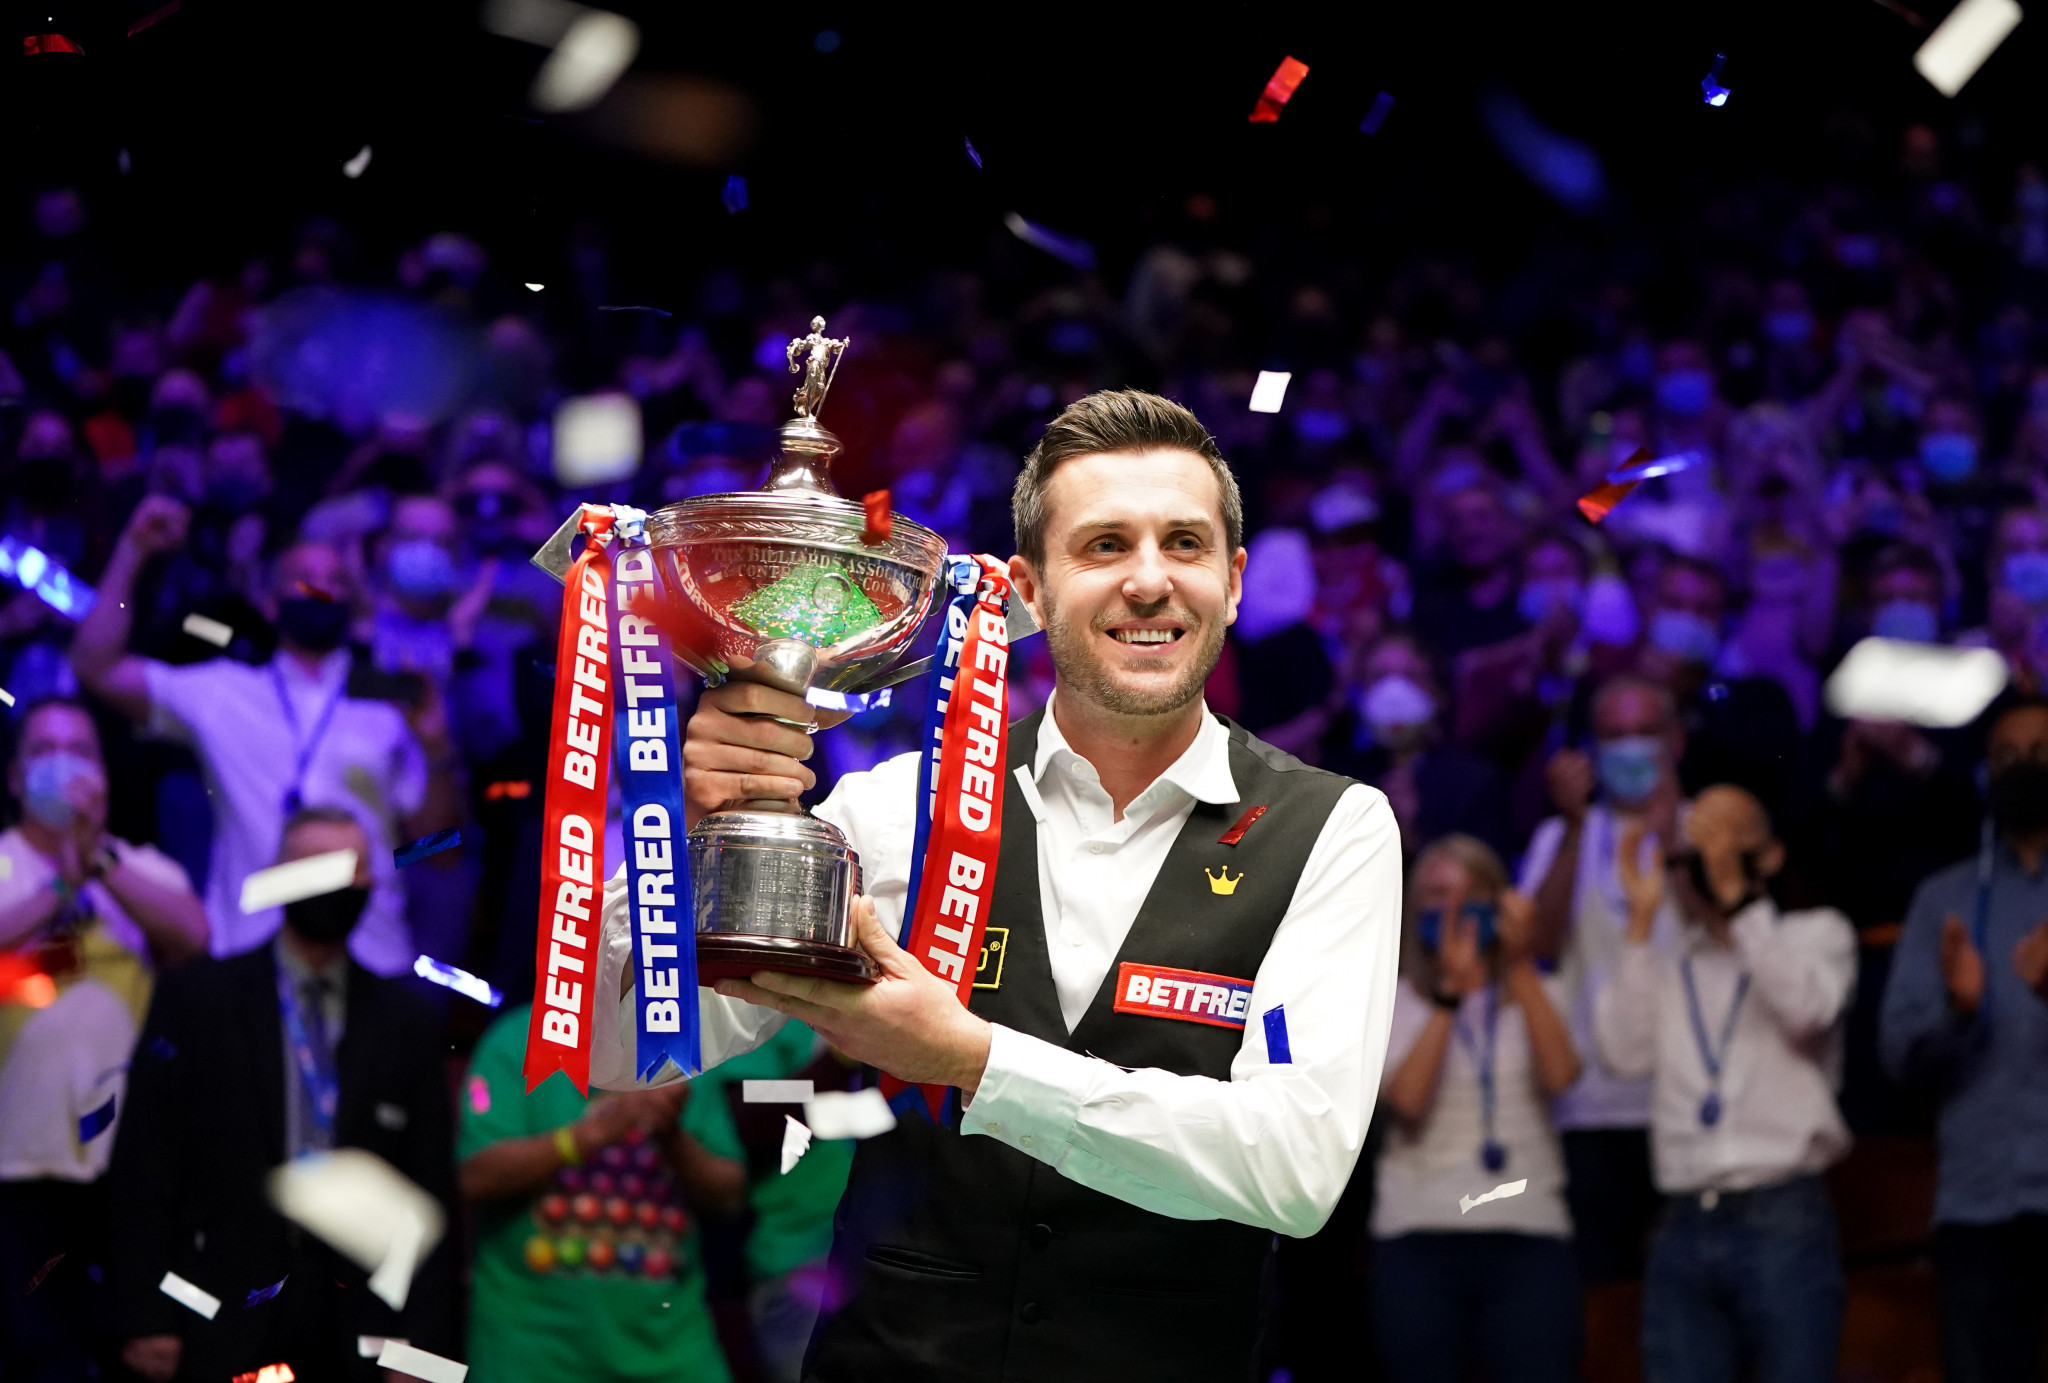 Selby defeats Murphy to win fourth World Snooker Championship